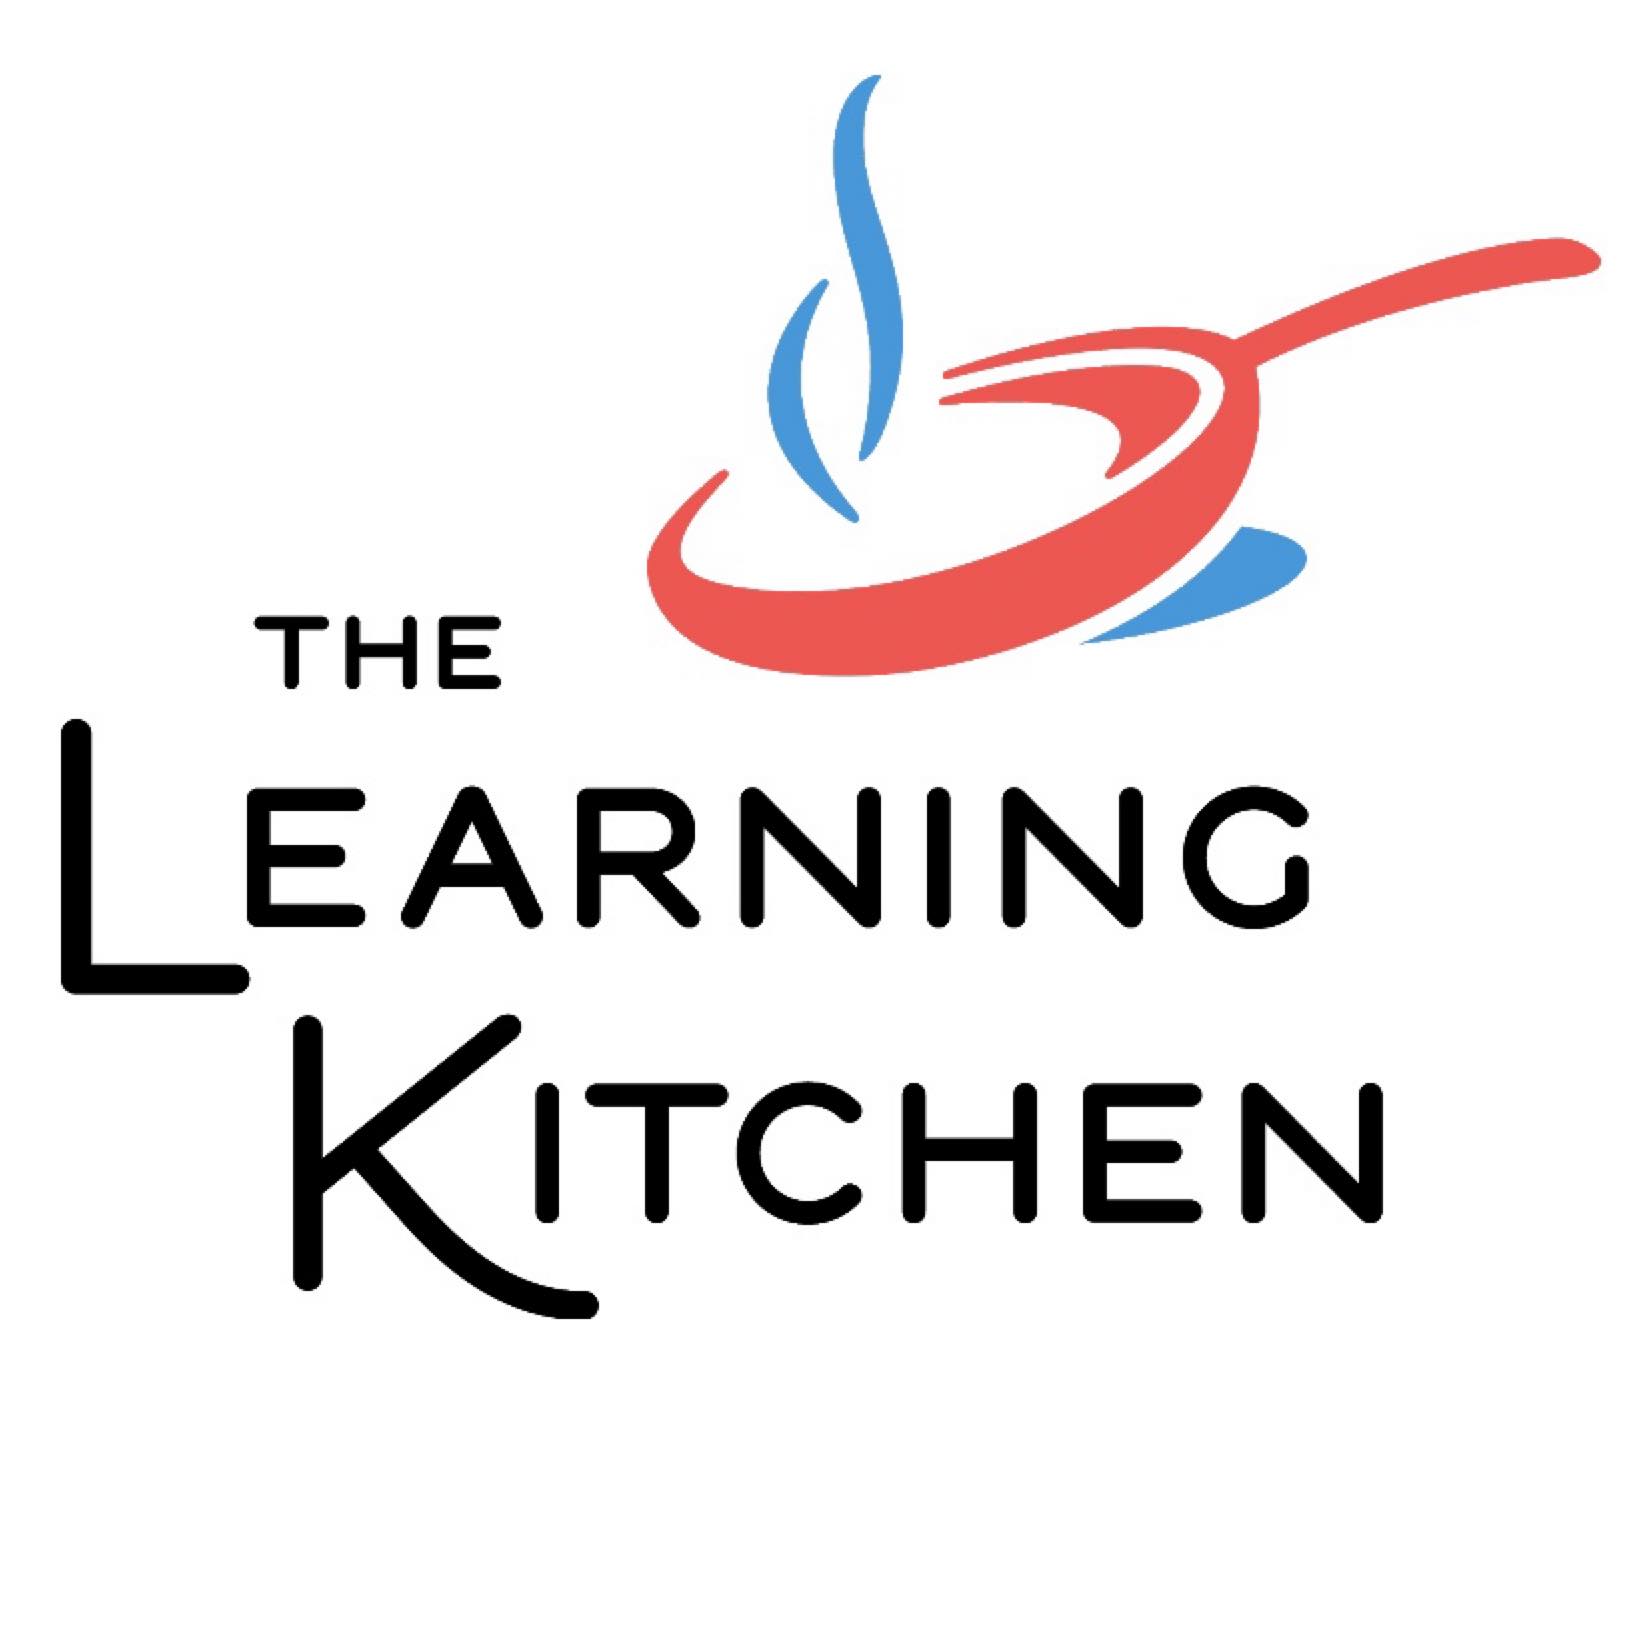 The Learning Kitchen